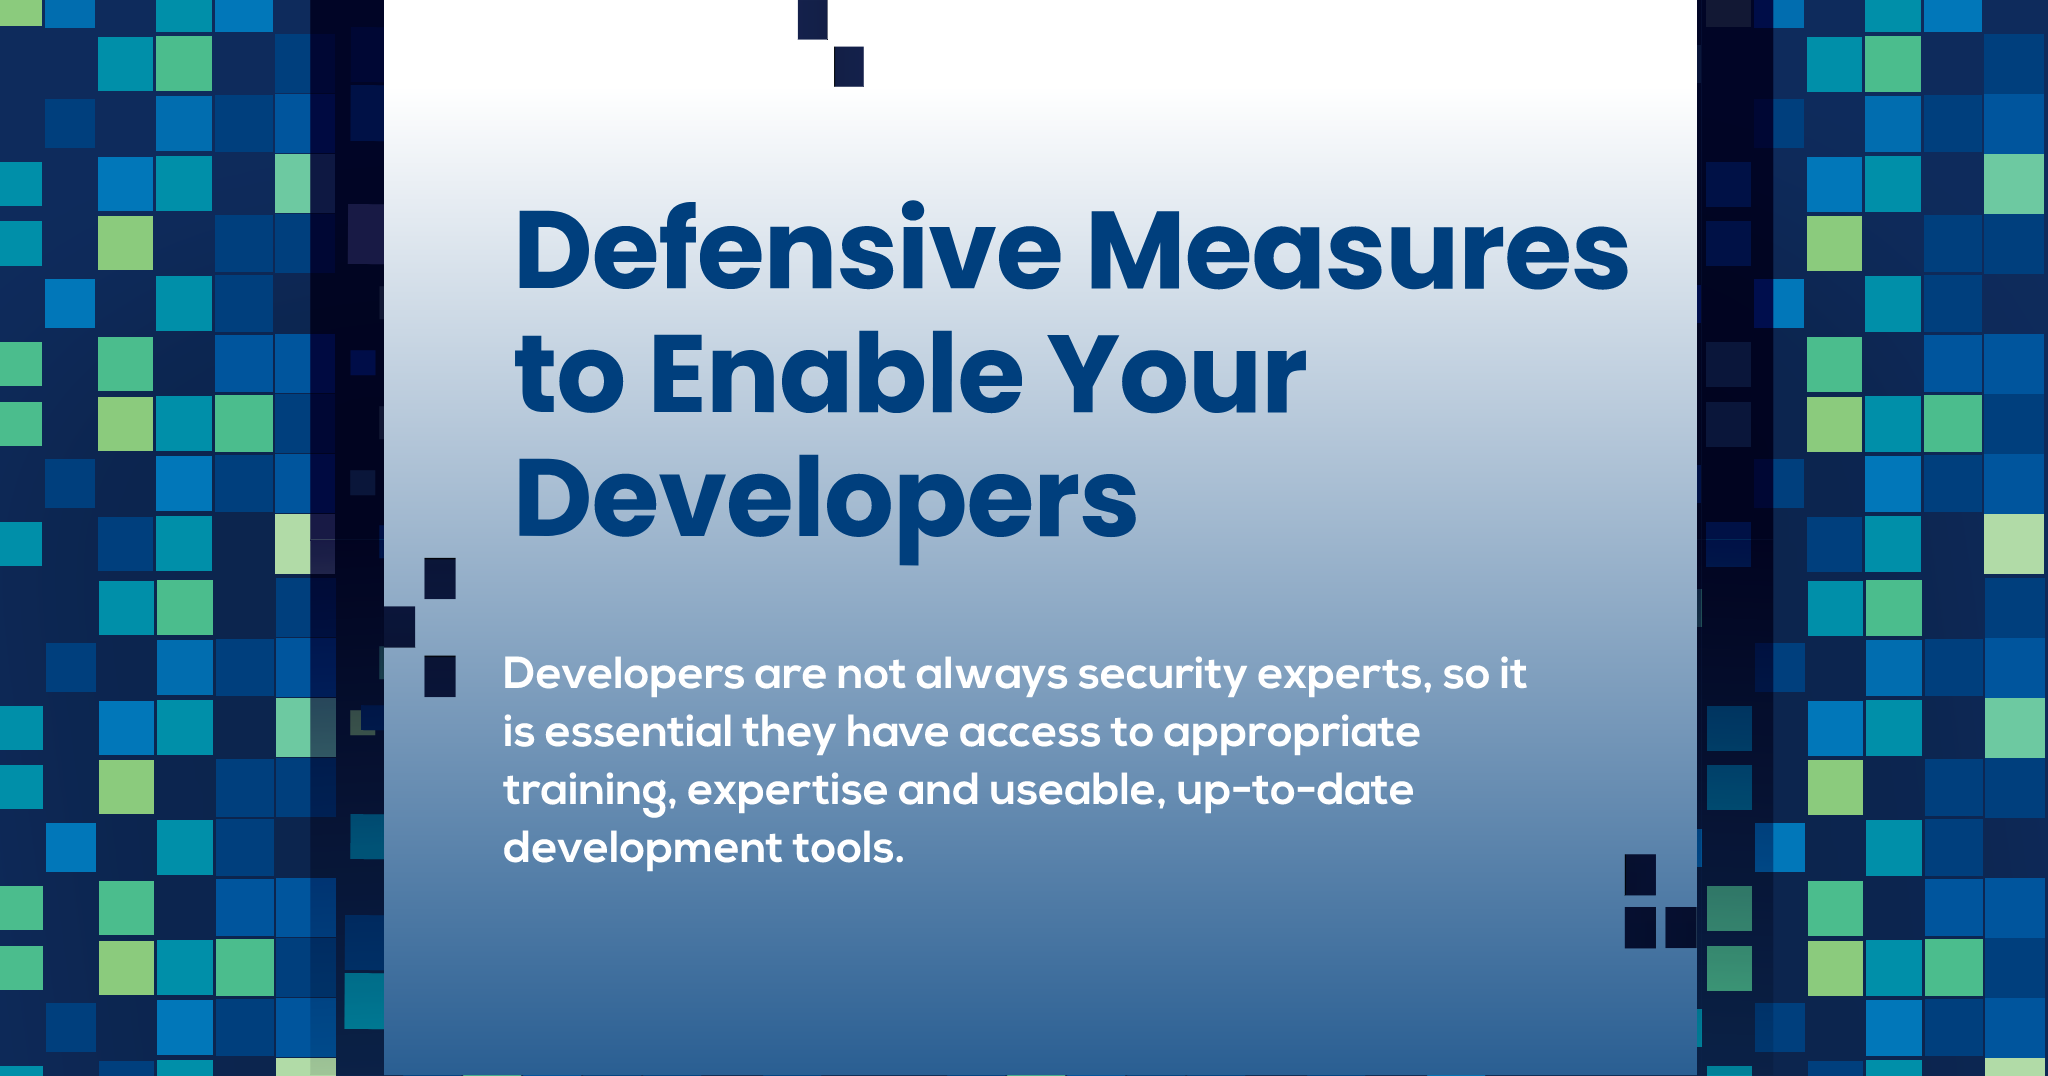 Defensive Measures to Enable Your Developers